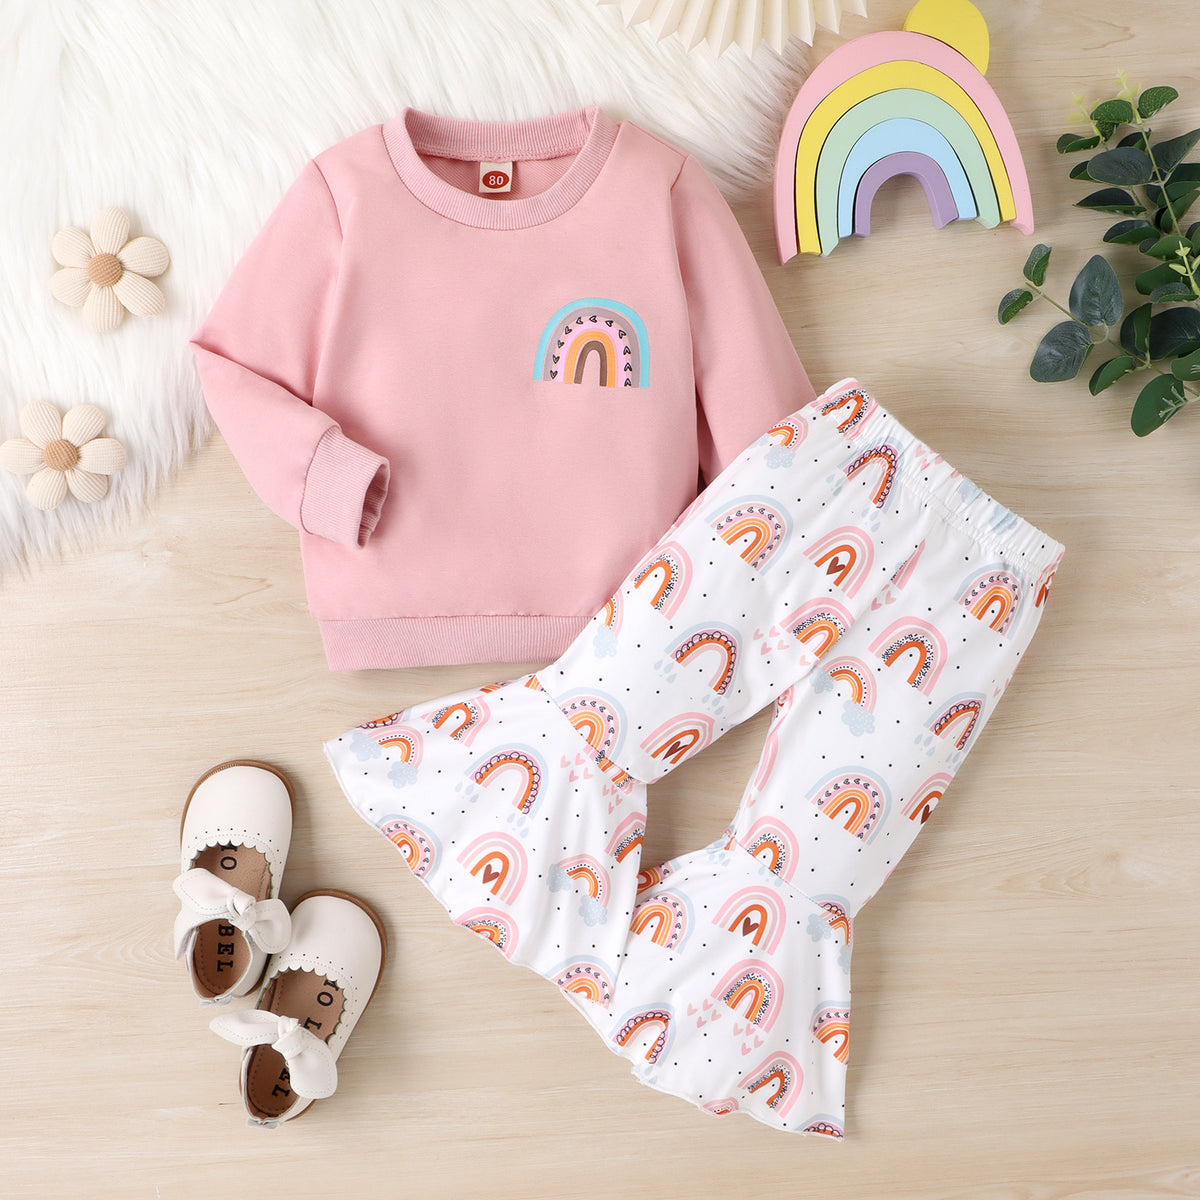 2 Pieces Set Baby Kid Girls Rainbow Tops And Pants Wholesale 24011133